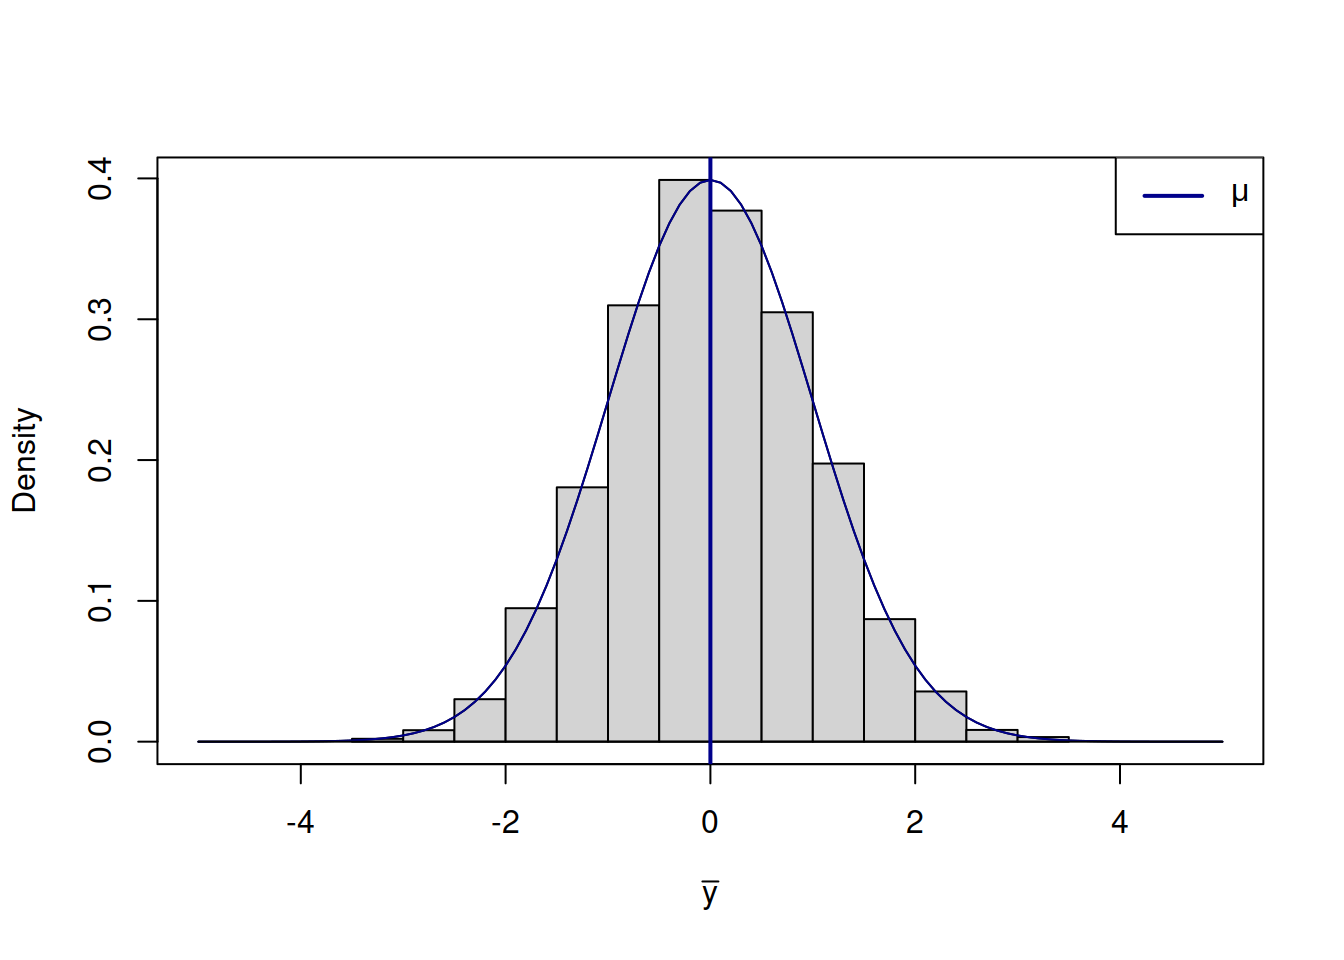 Distribution of the sample mean.